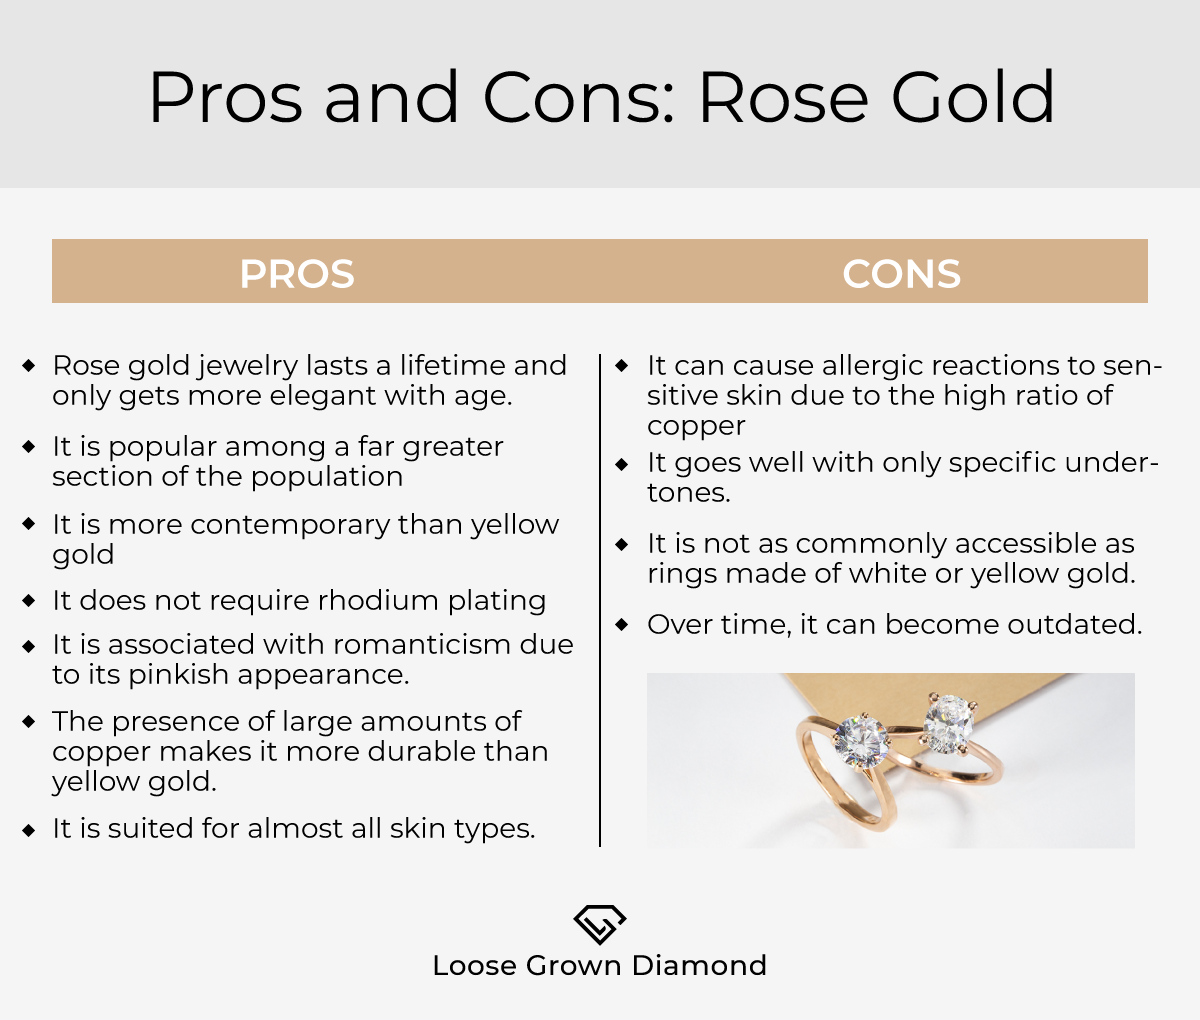 Pros and Cons: Rose Gold